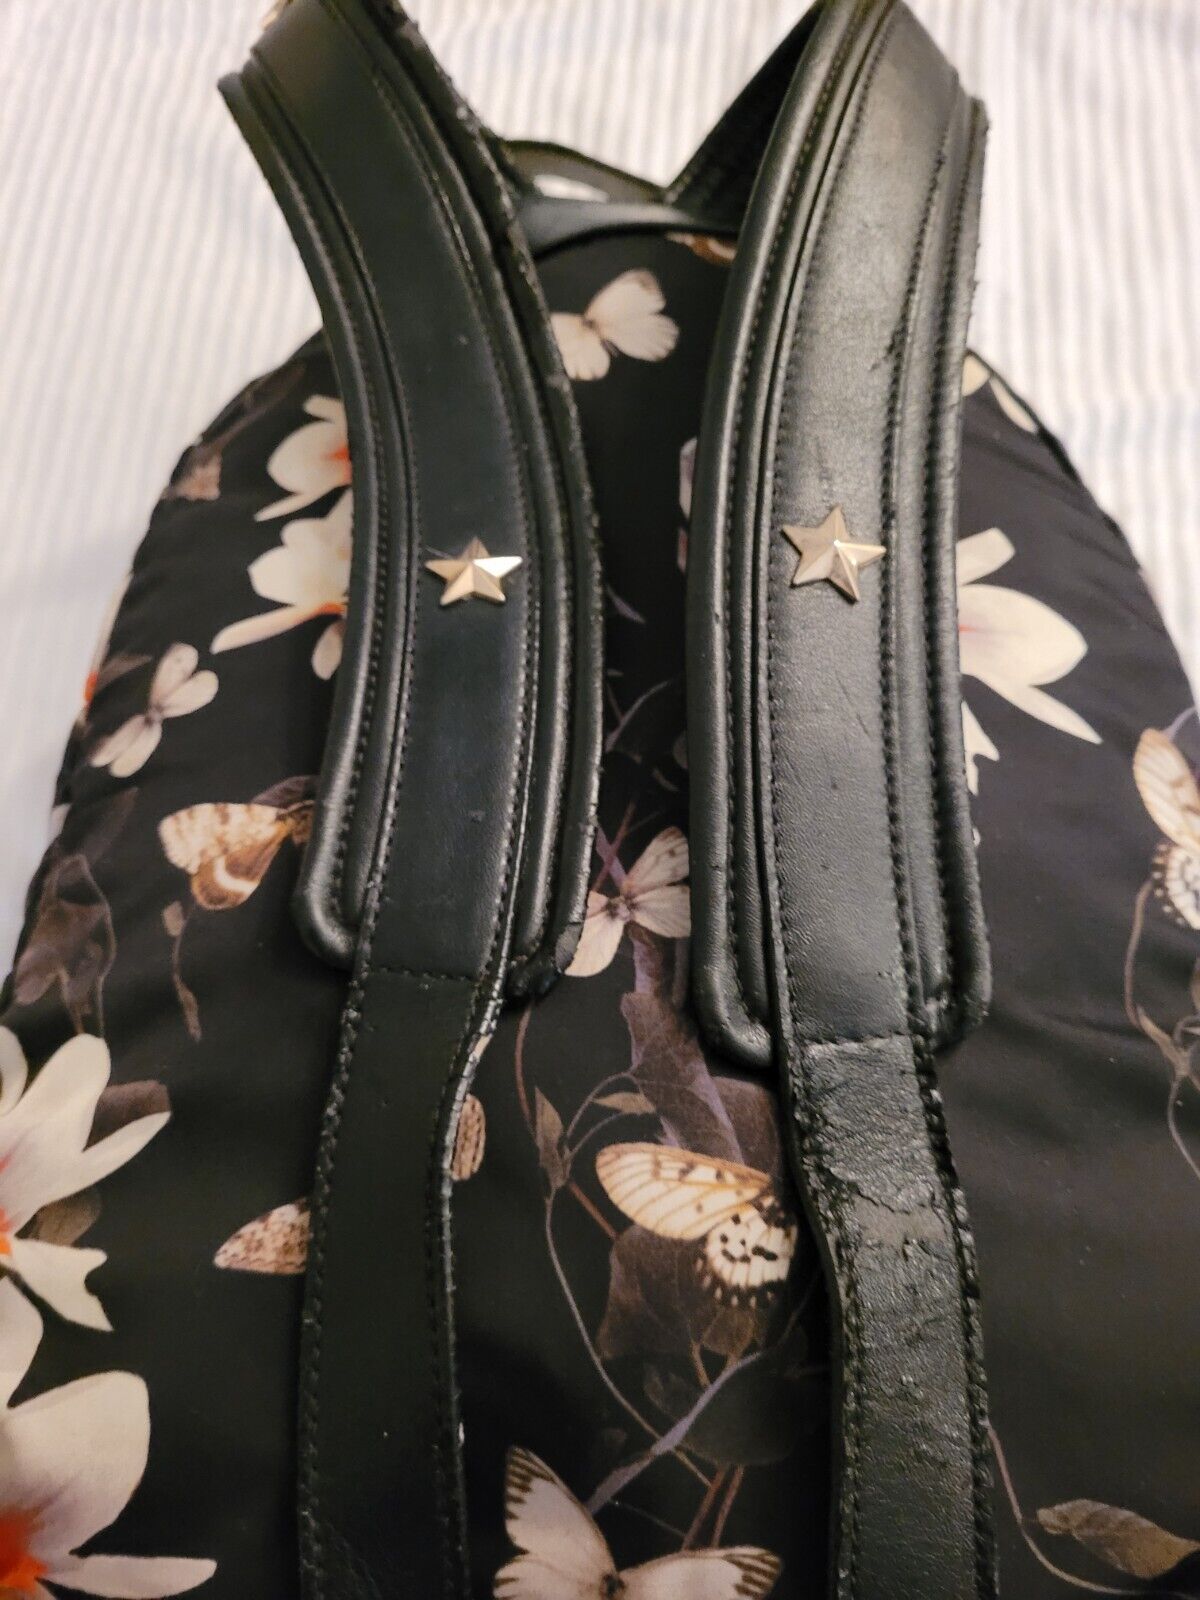 Authentic GIVENCHY Floral Antigona Butterfly Black Nylon Leather Backpack  $1,320